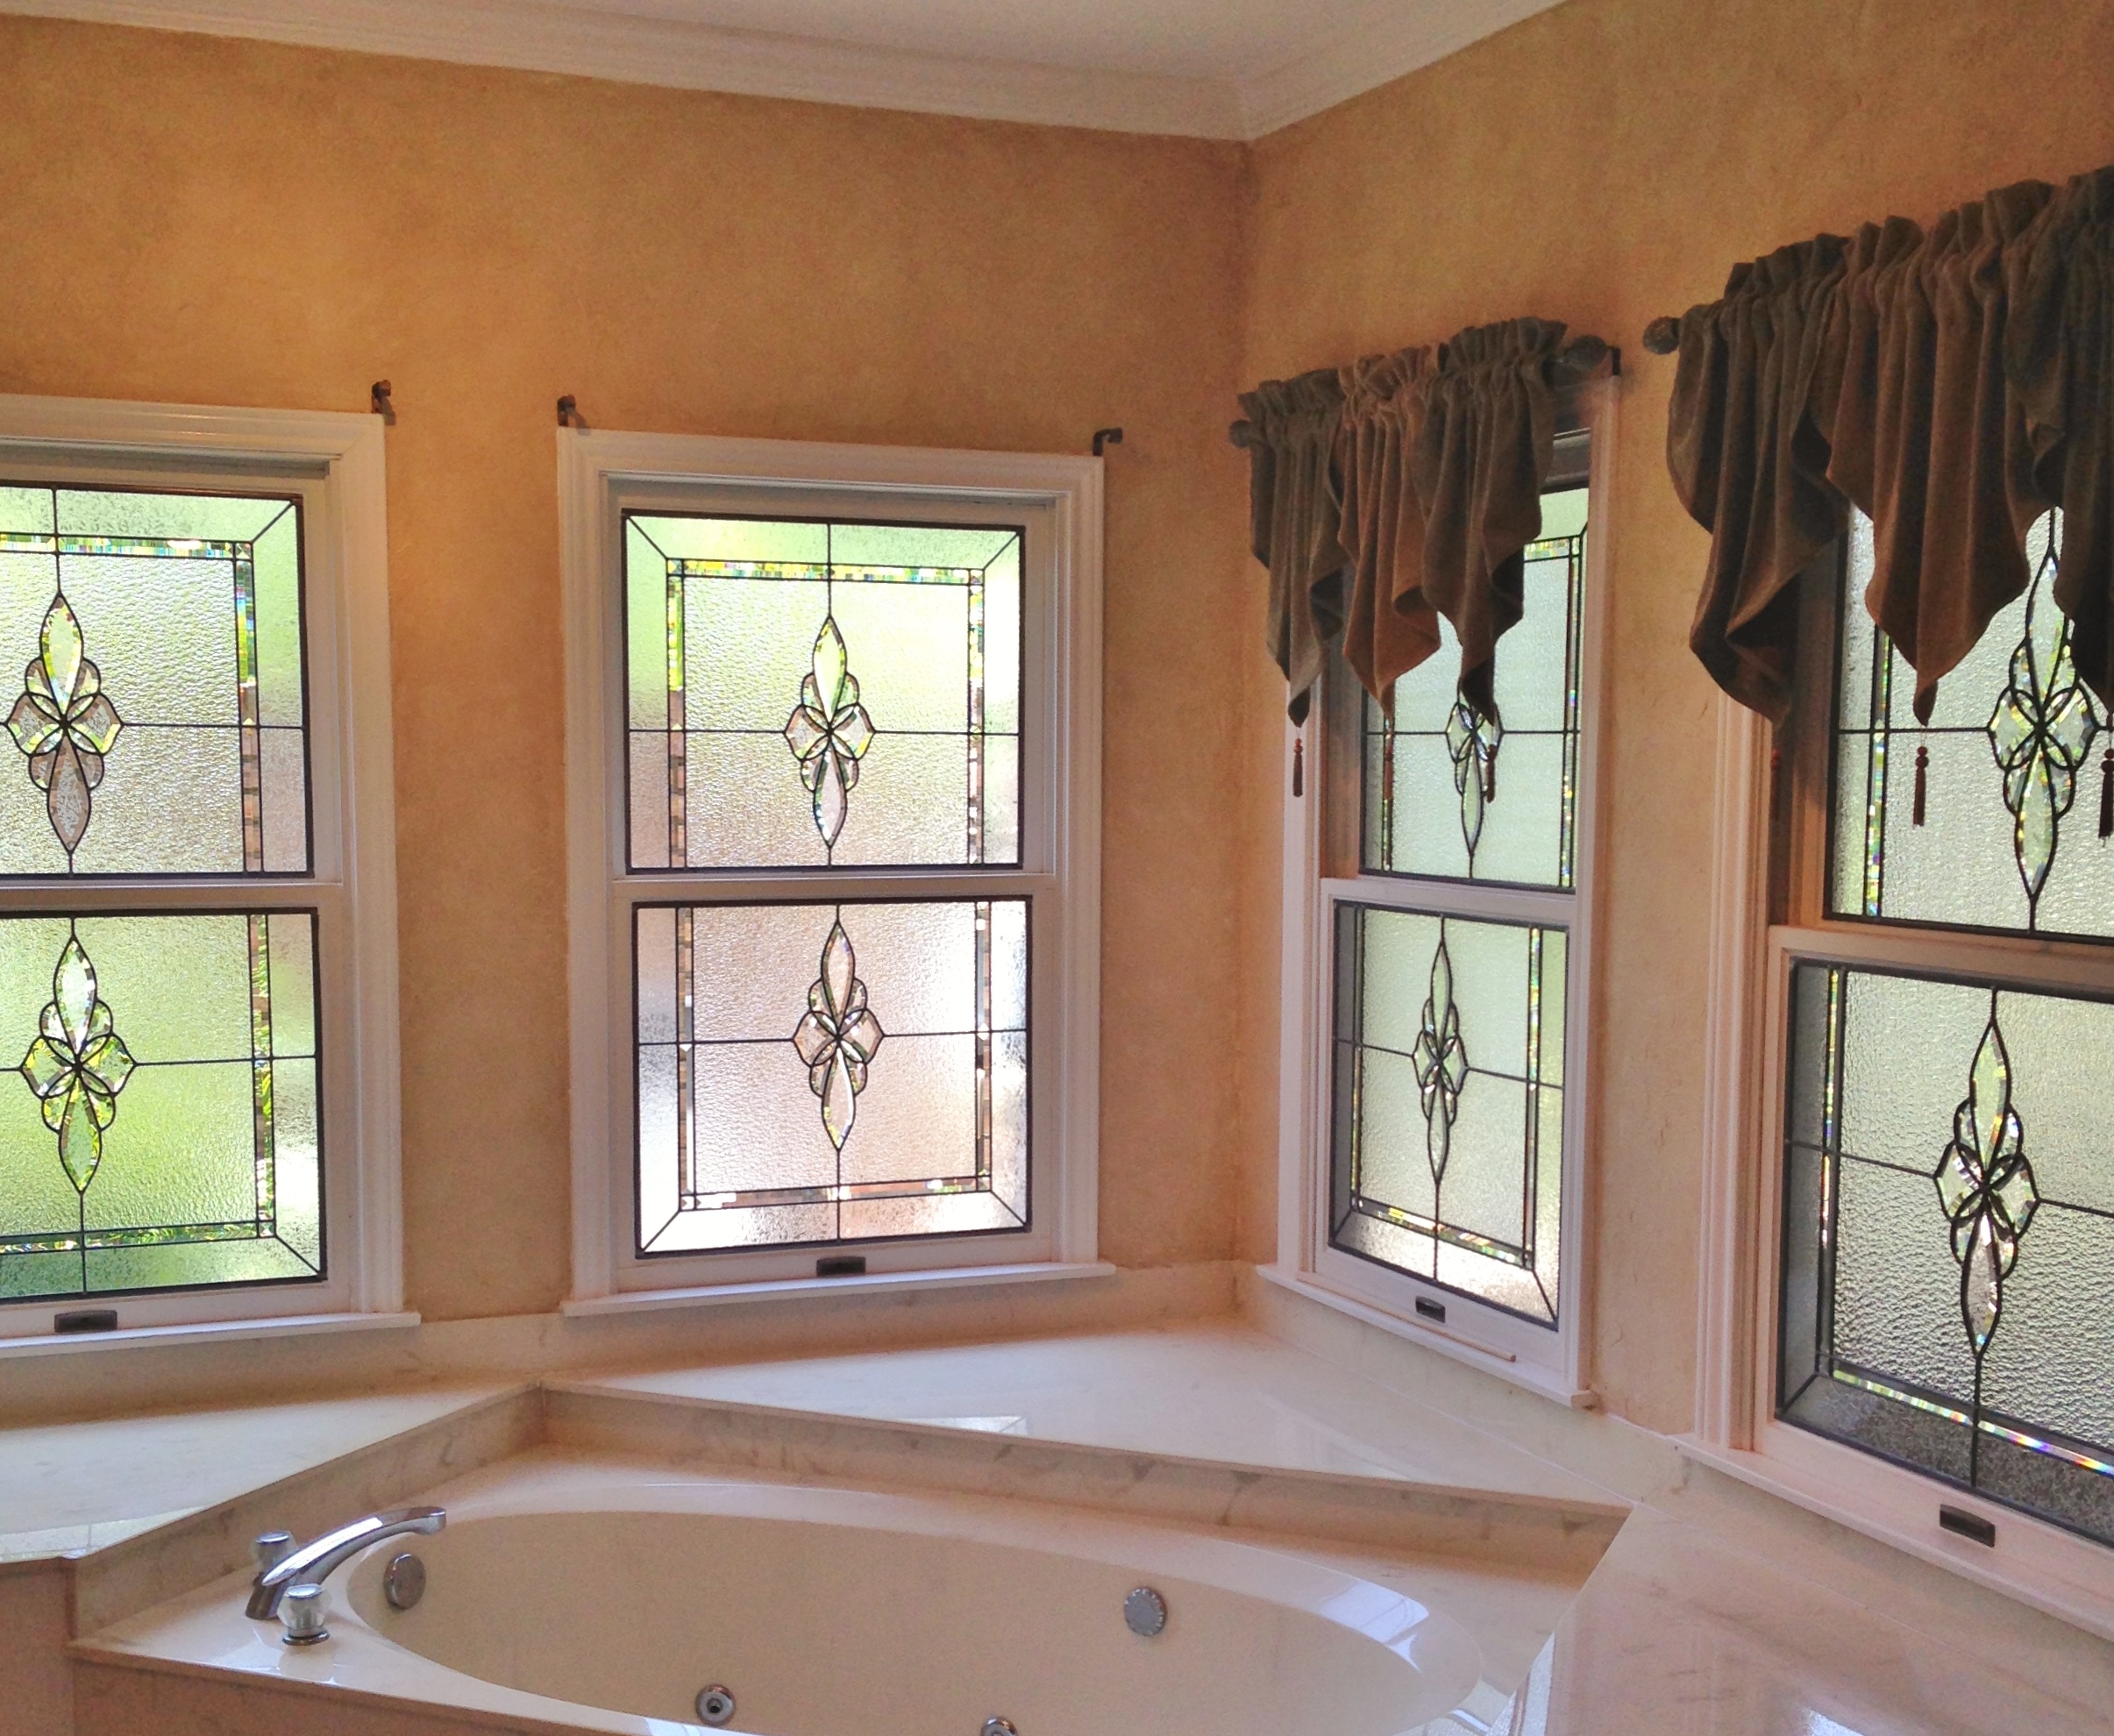 Antique stained glass bathroom in Houston with colorful light patterns